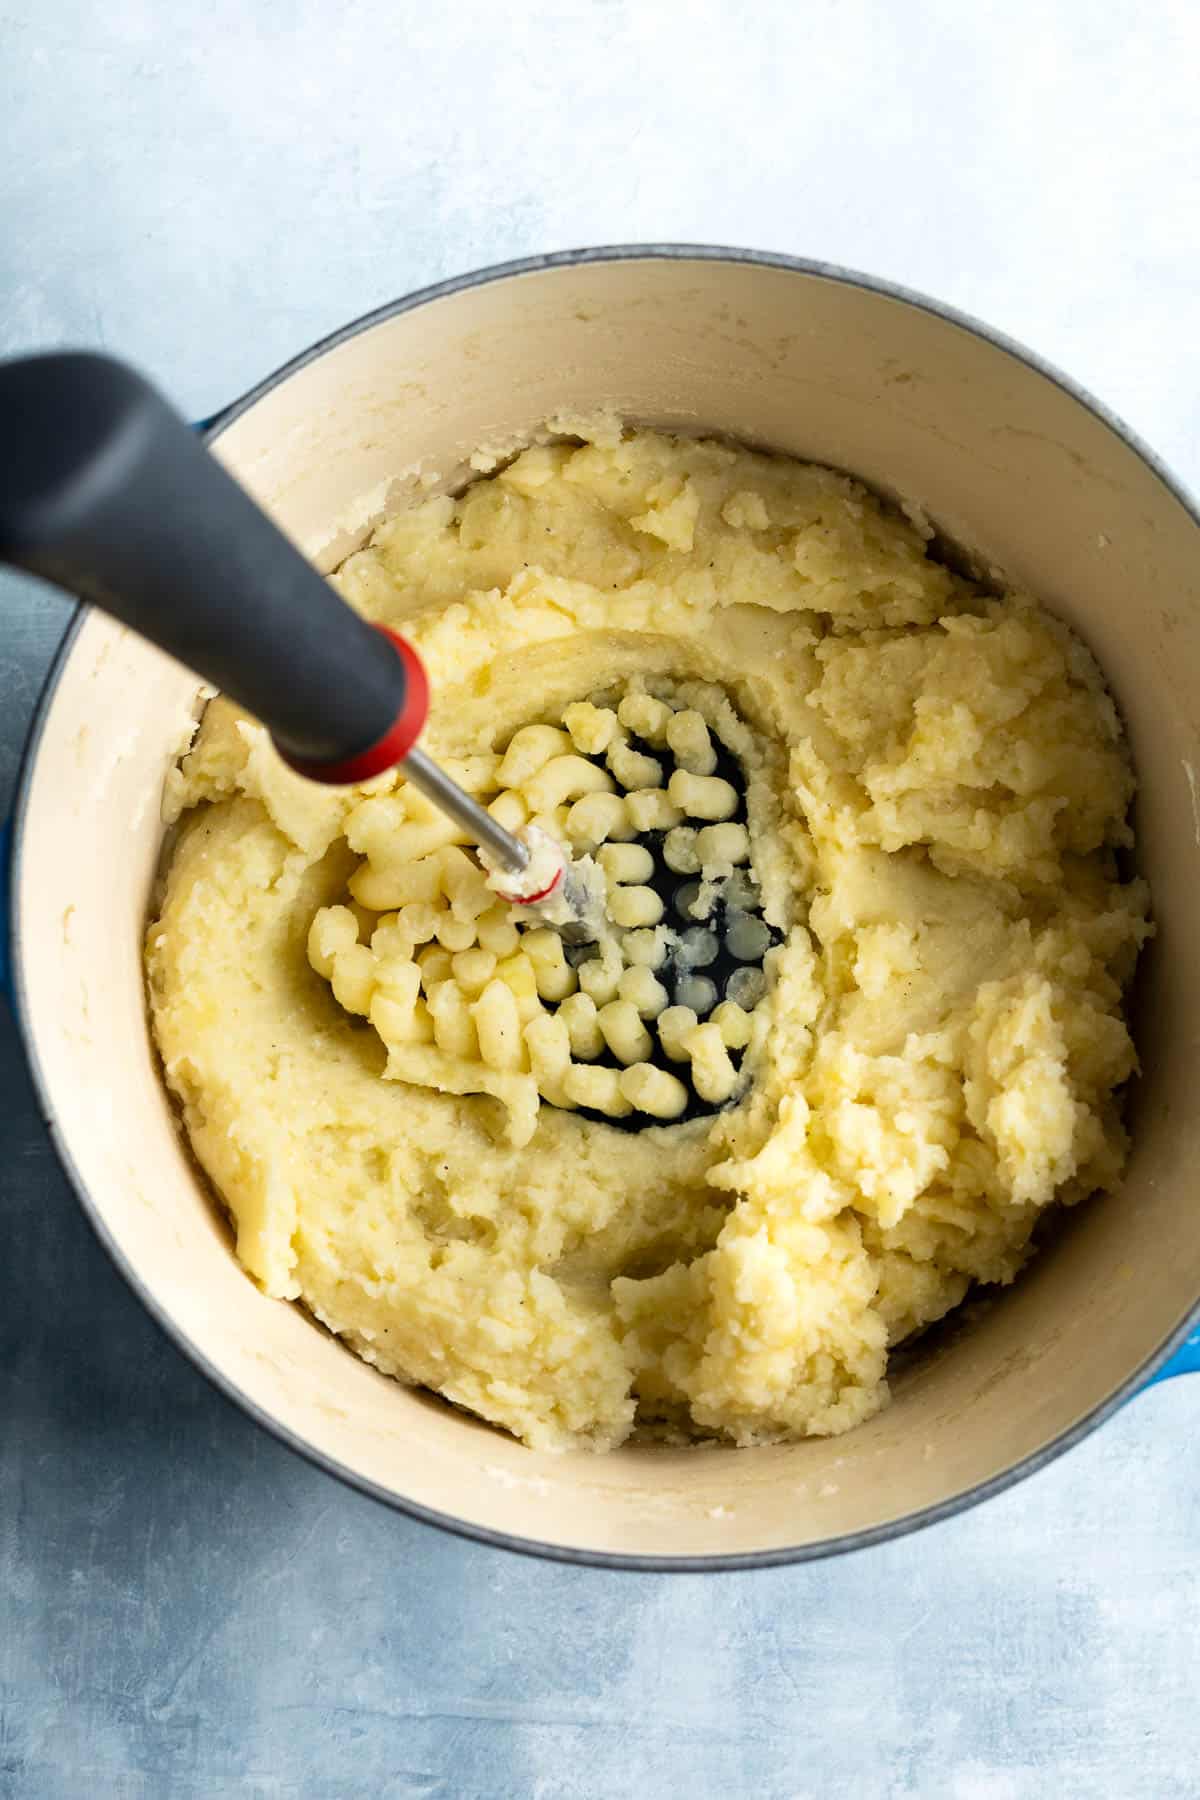 The mashed potatoes being combined with a handheld masher in a pot.